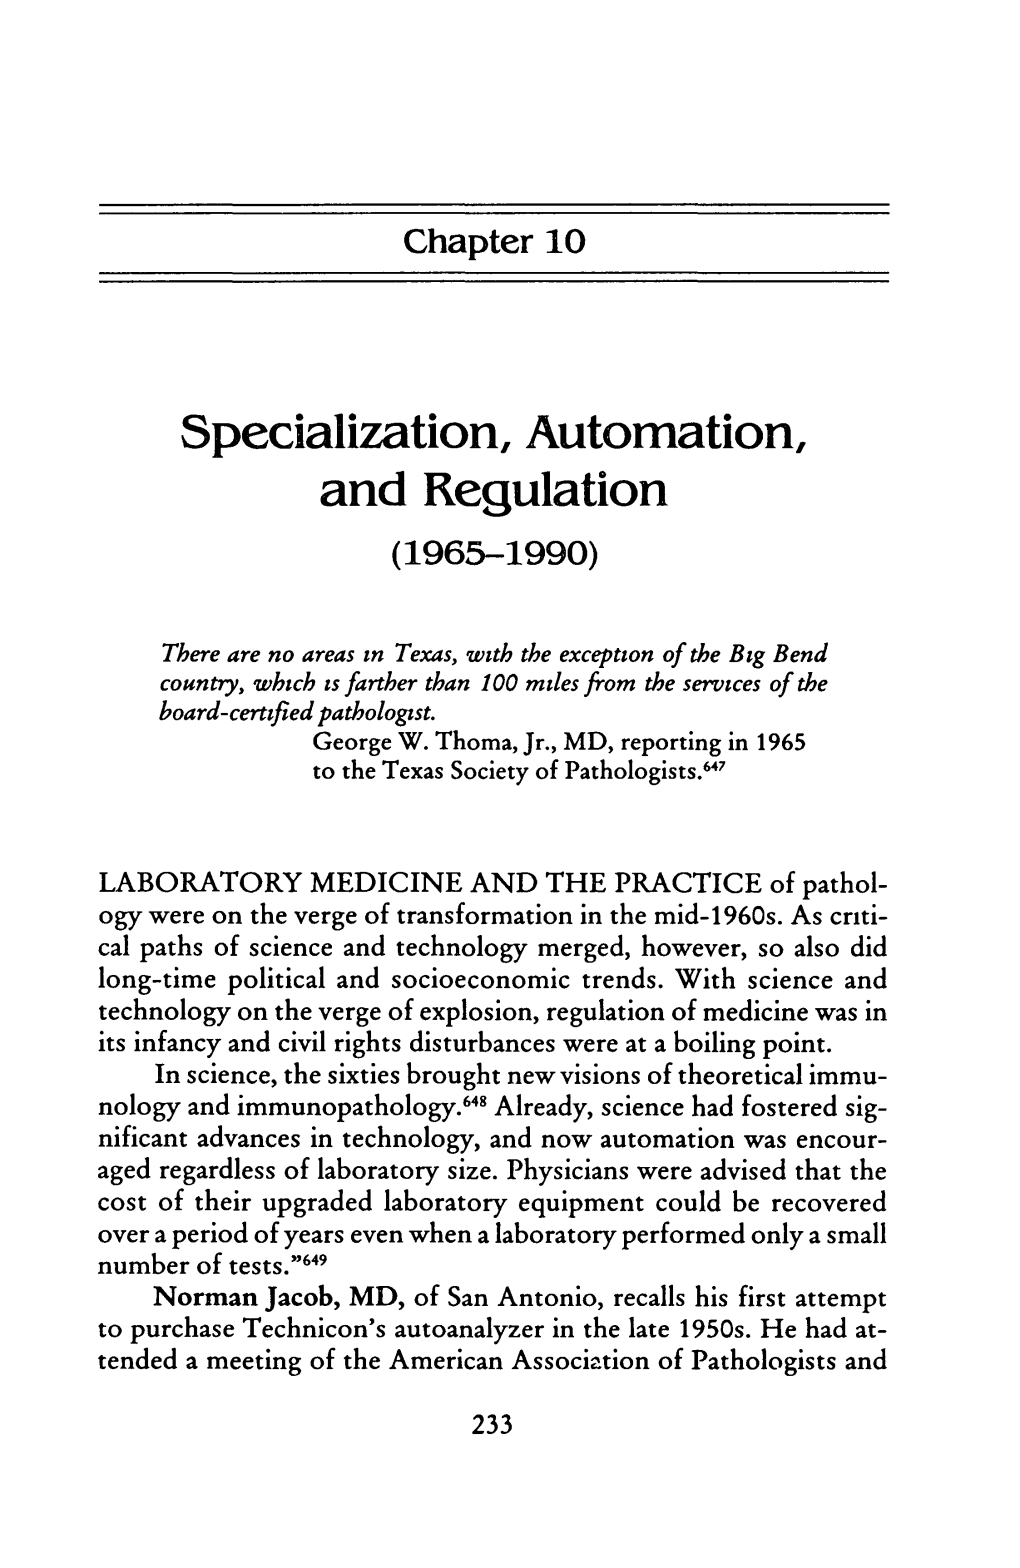 Specialization, Autol11ation, and Regulation (1965-1990)